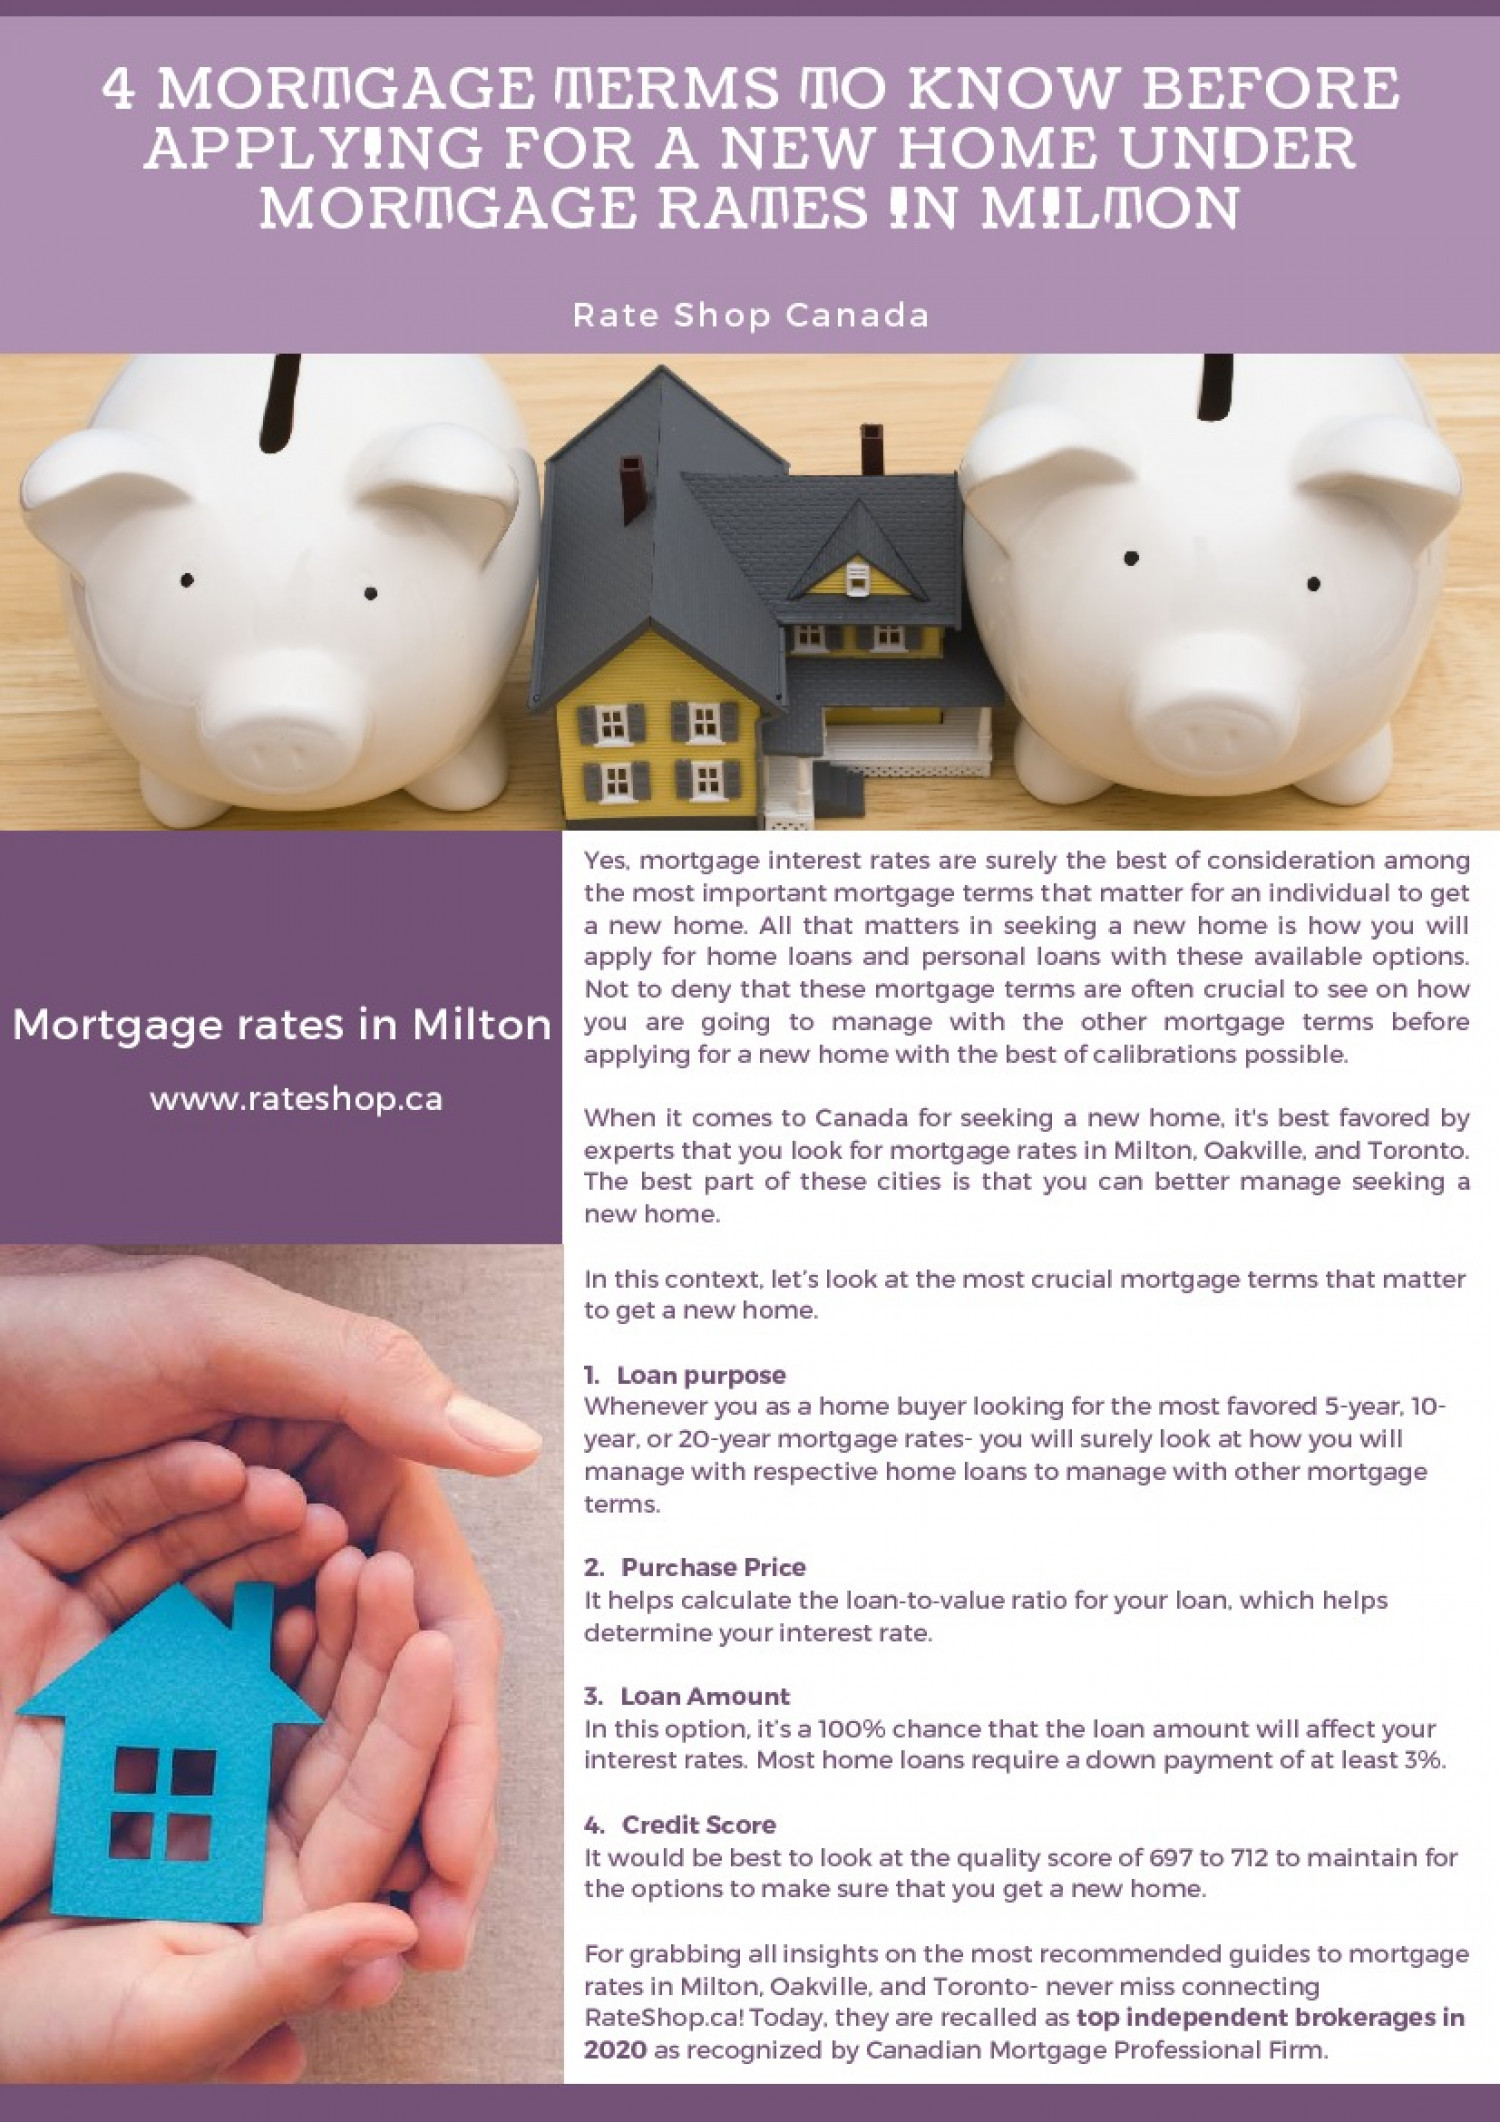 4 Mortgage Terms to Know Before Applying for a new home under Mortgage Rates in Milton Infographic